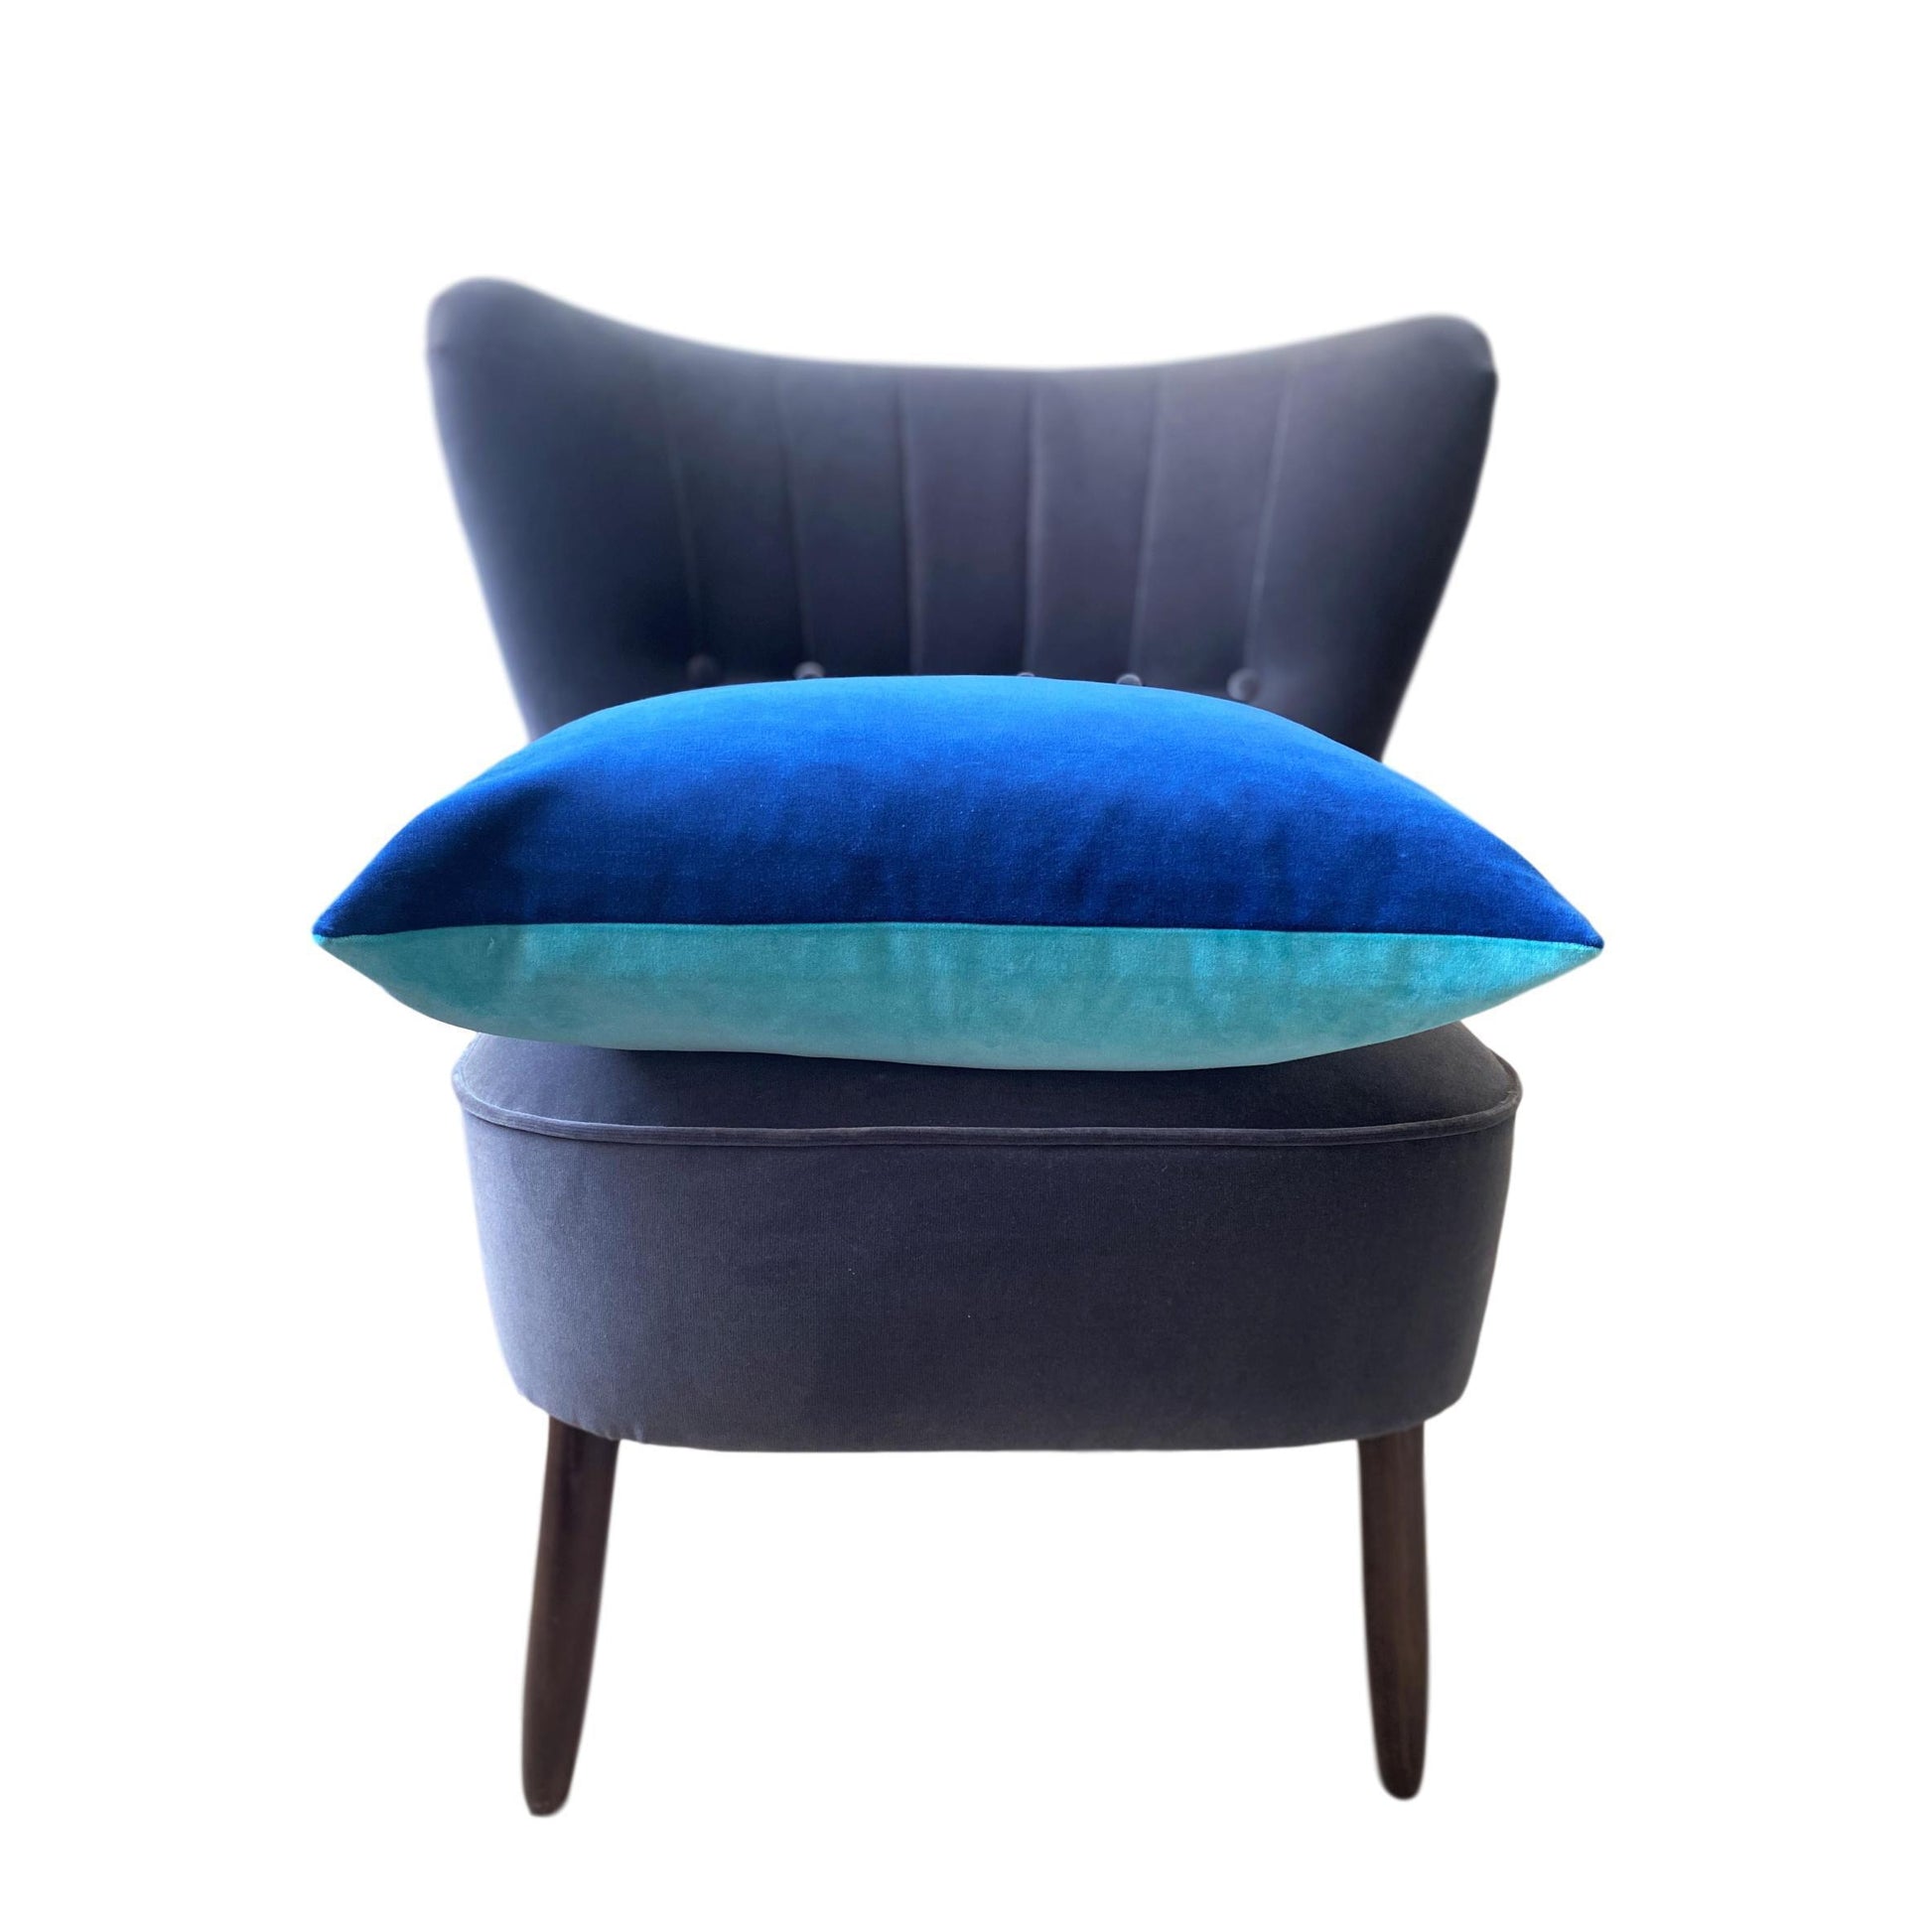 60cm cushion covers in turquoise velvet with royal blue